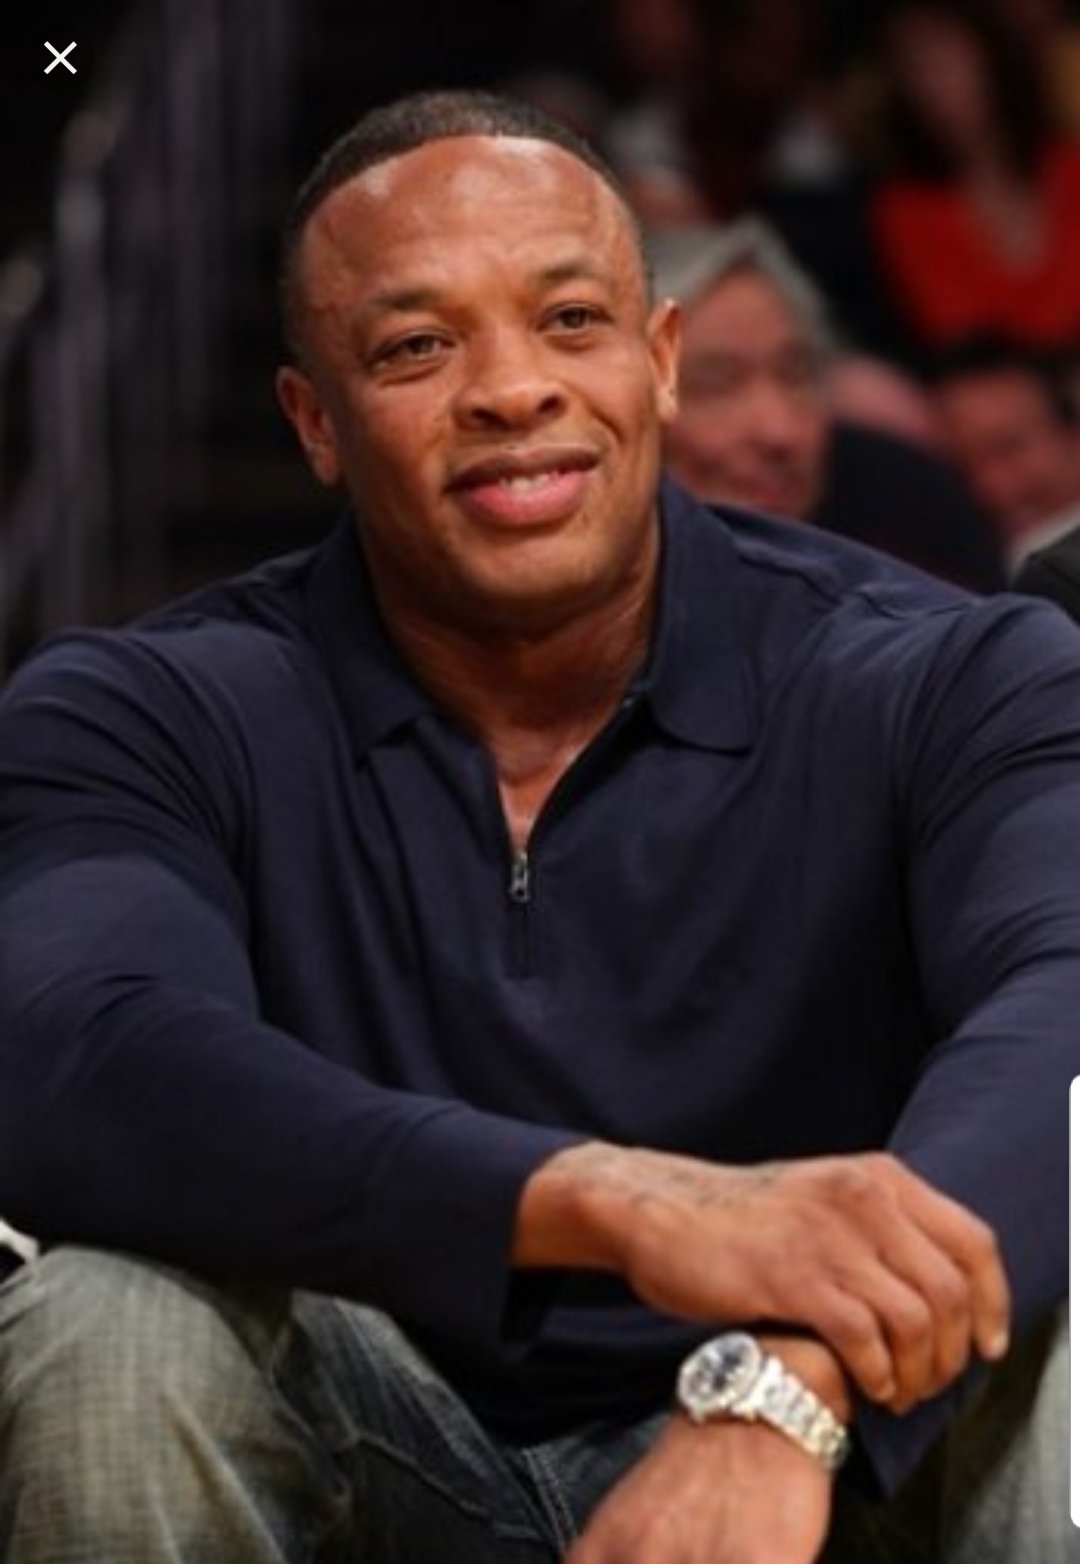 Happy birthday to a true GOAT, Dr. Dre. What are your 5 favorite Dre songs/beats?  